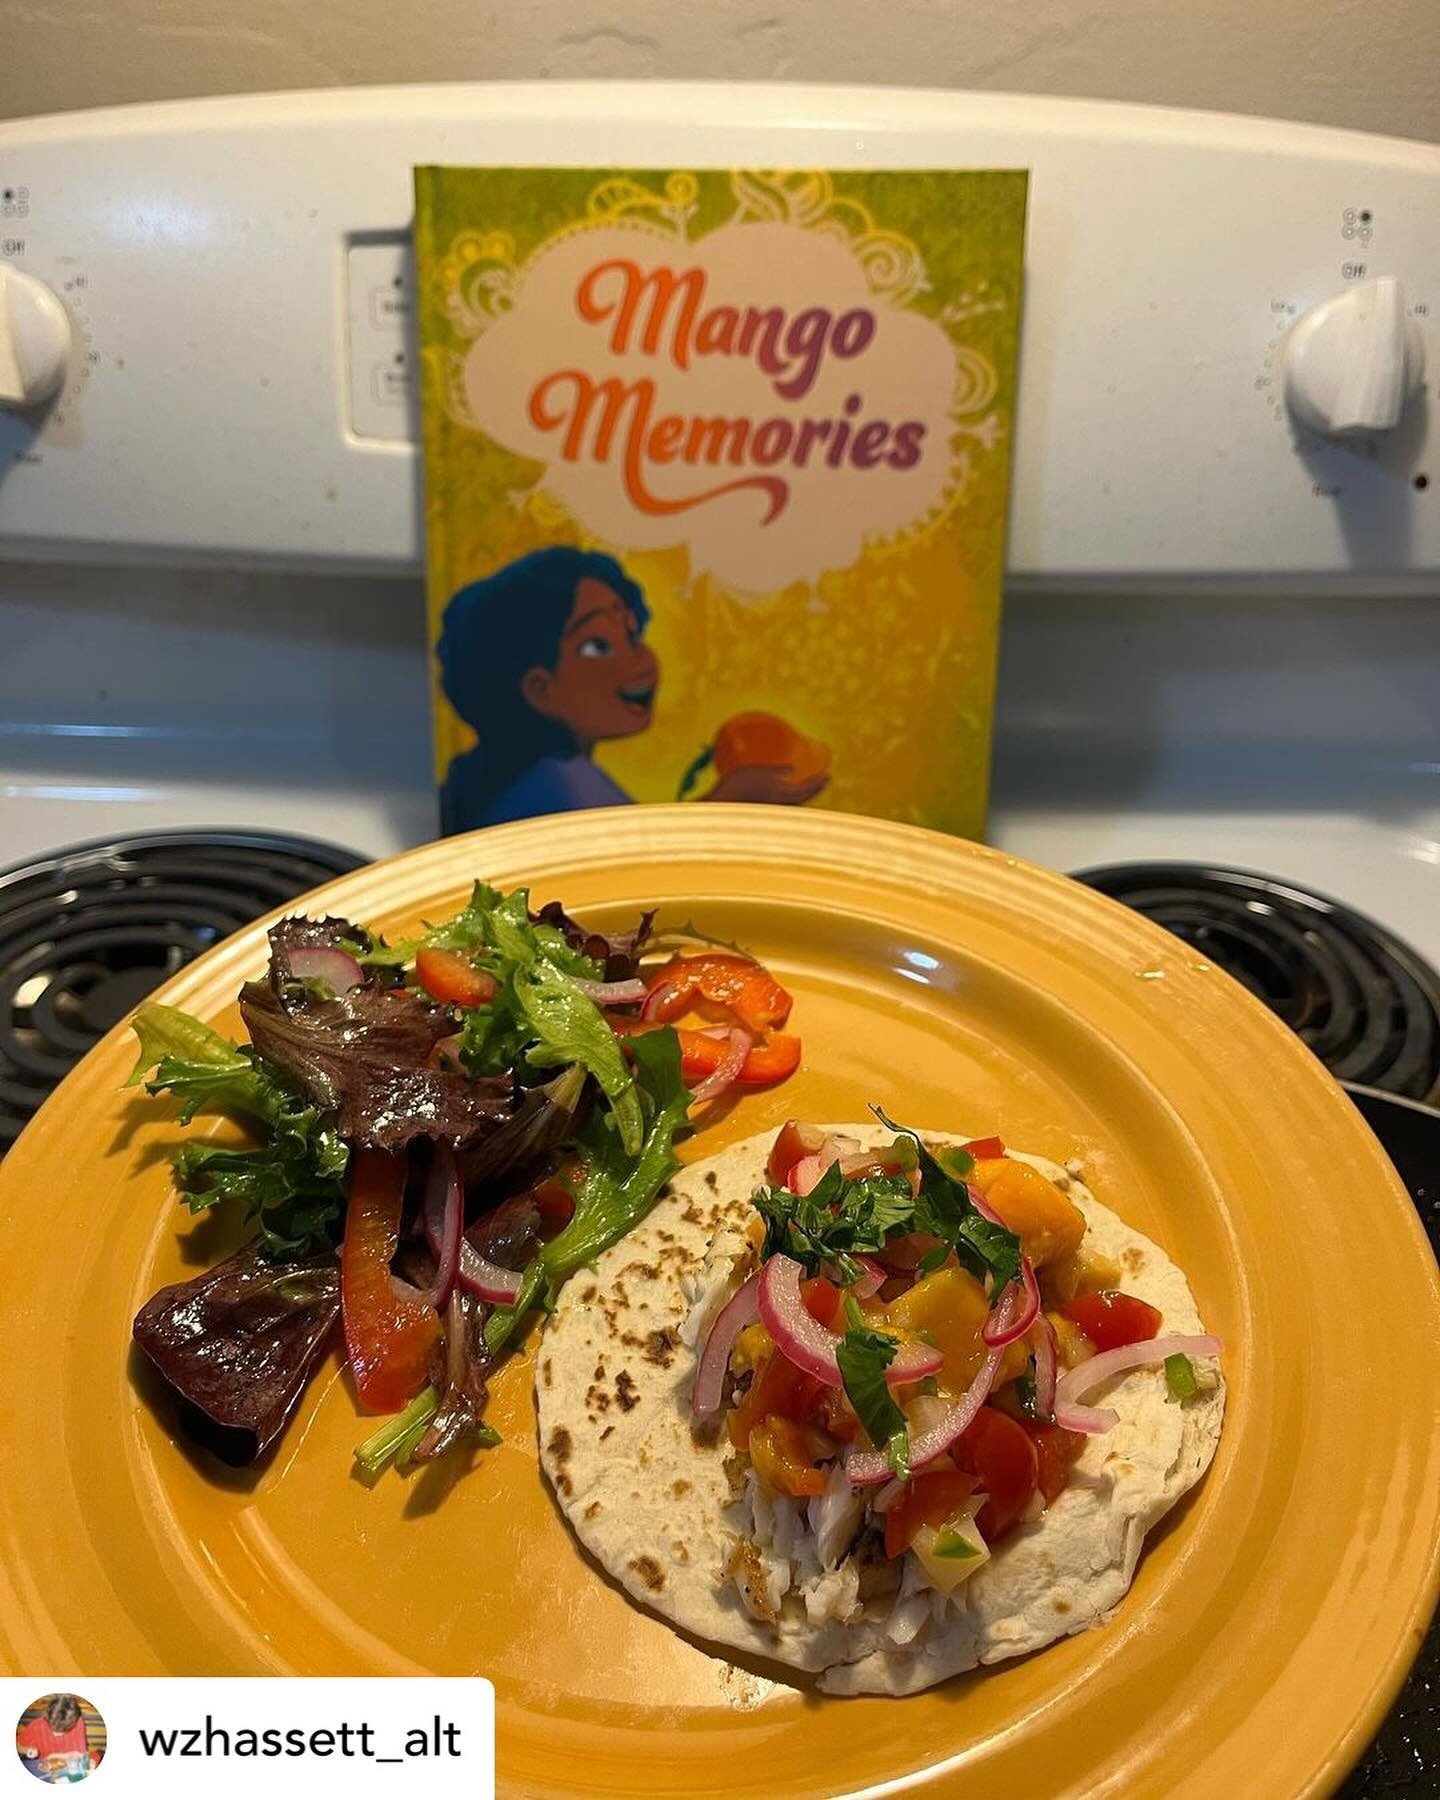 This Mumma is extra happy today because her daughter&rsquo;s friends at college are reading her book, cooking delicious dishes, and making their own mango memories. Thanks for all the book love kiddos! This one is truly special 🥹&hearts;️🥭🥰

Poste